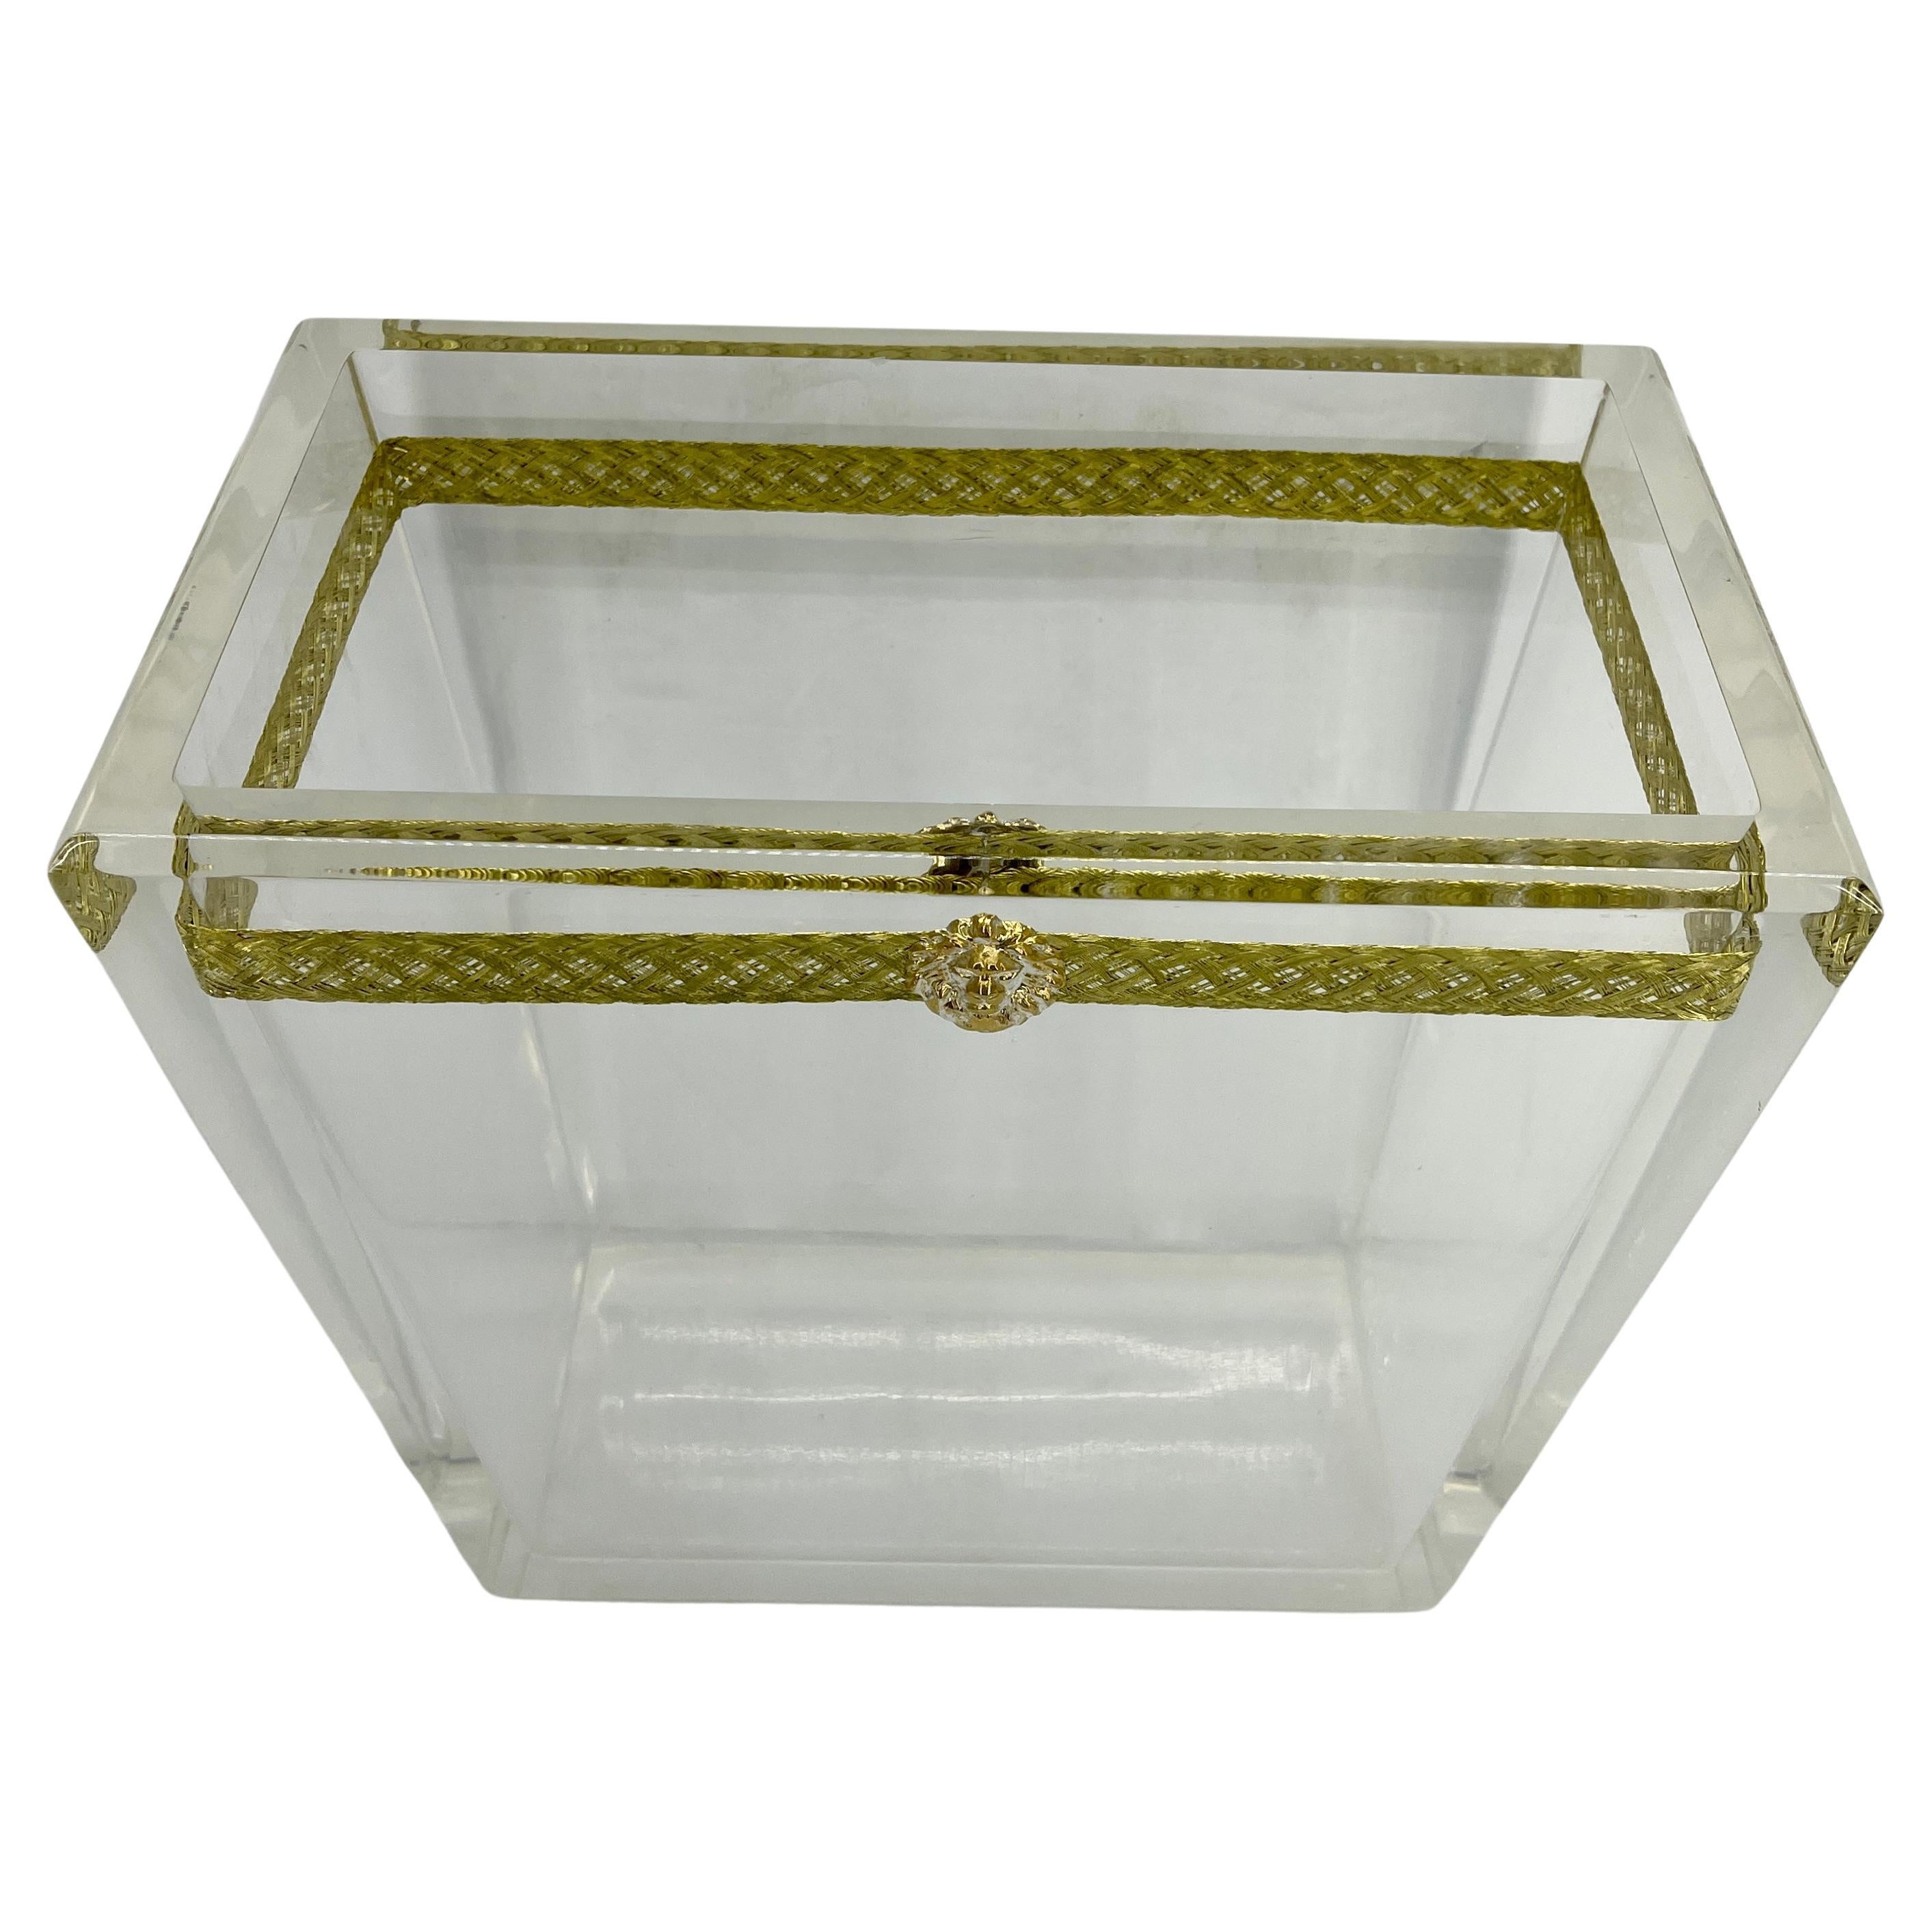 Italian Mid-Century Modern thick lucite magazine rack or trash can, with lion head and gilt metal thread.